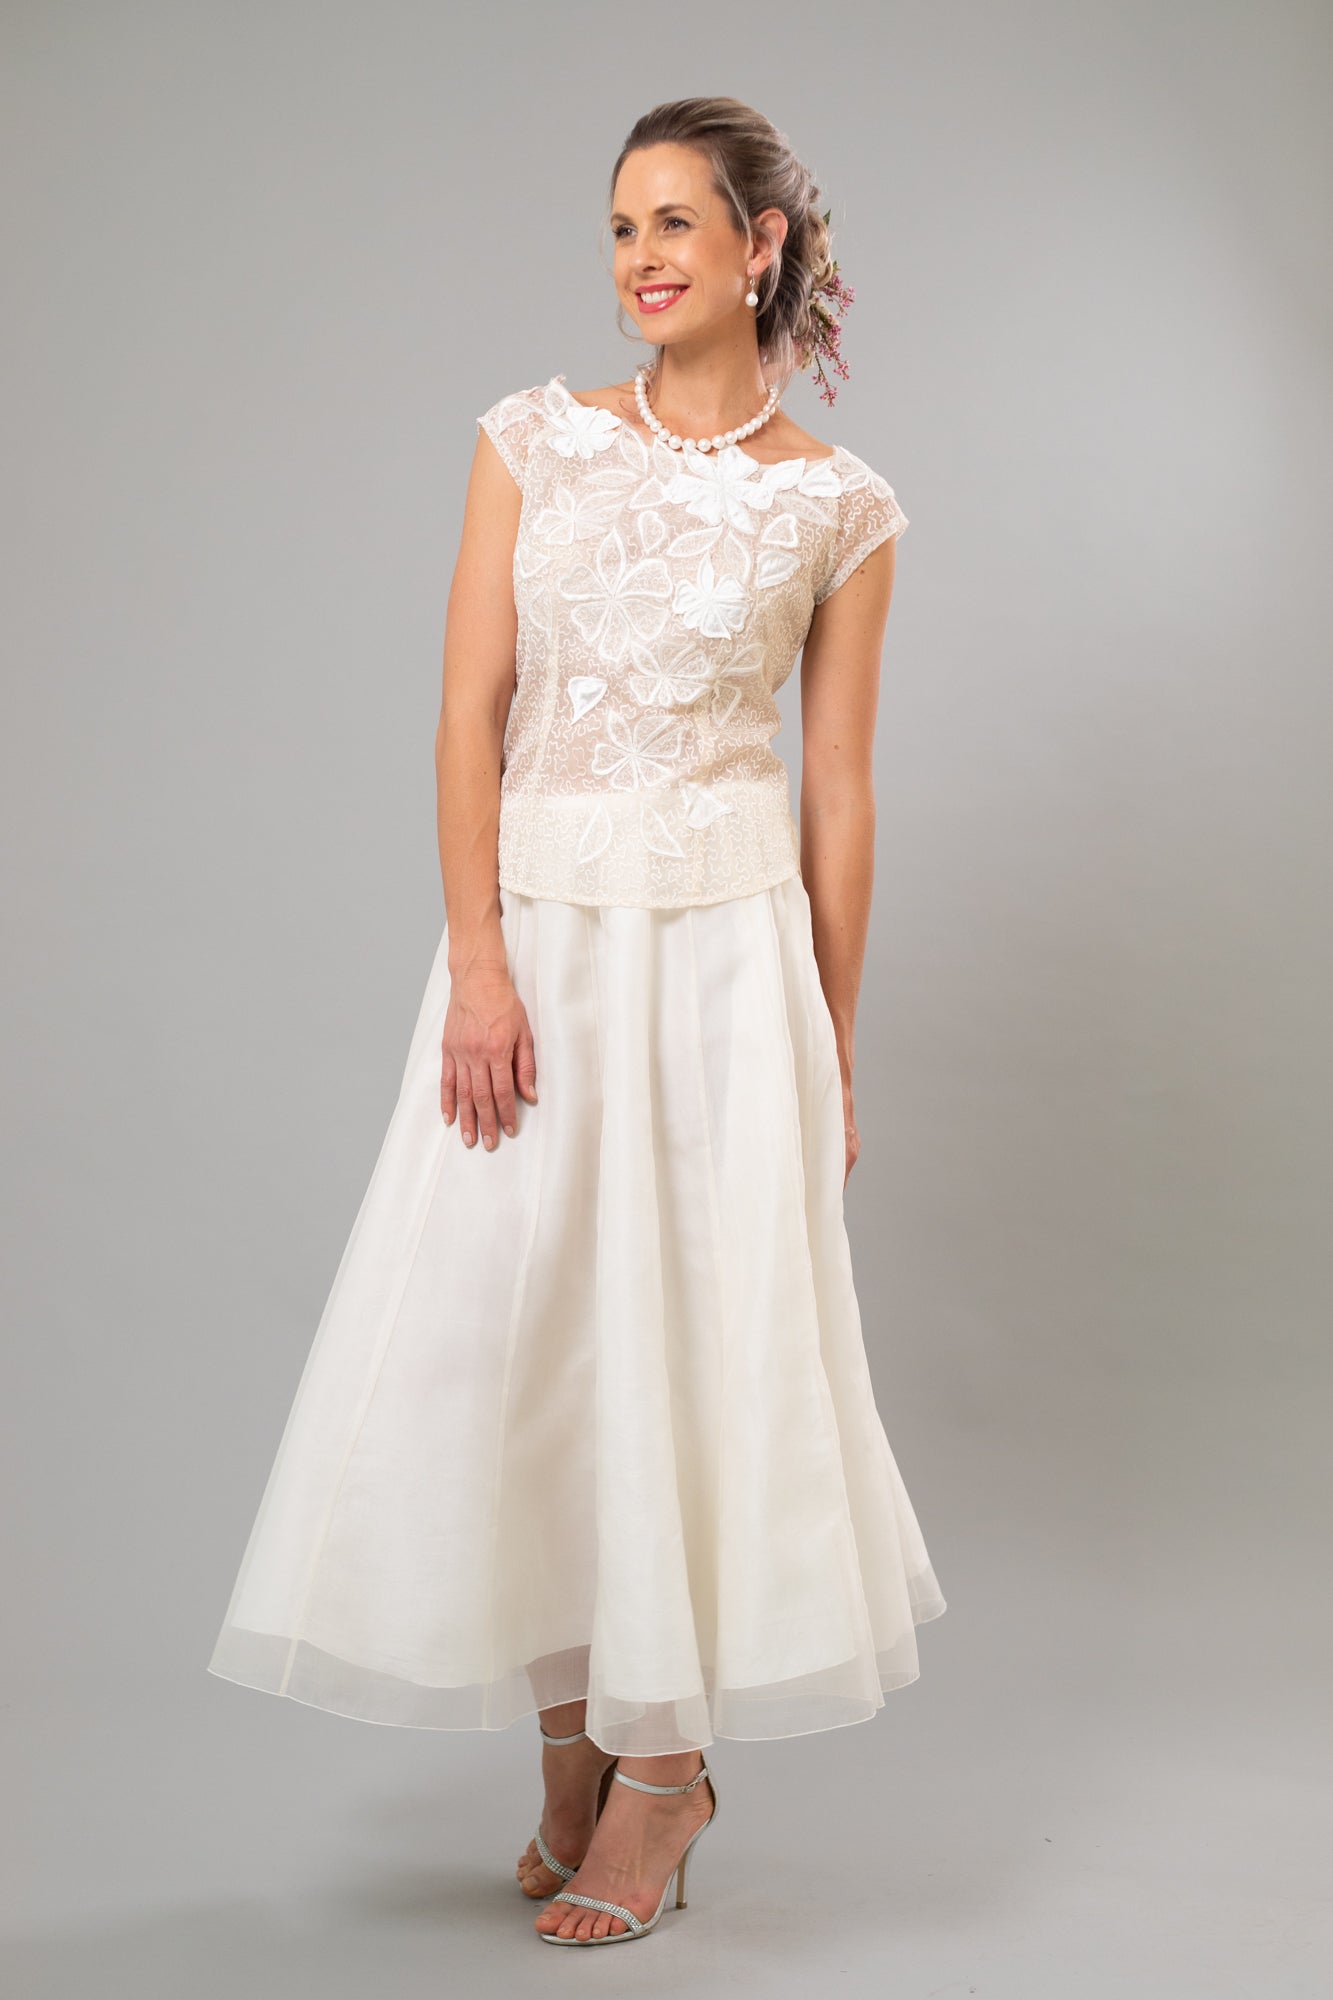 Gypsy Skirt - For the Understated Bride